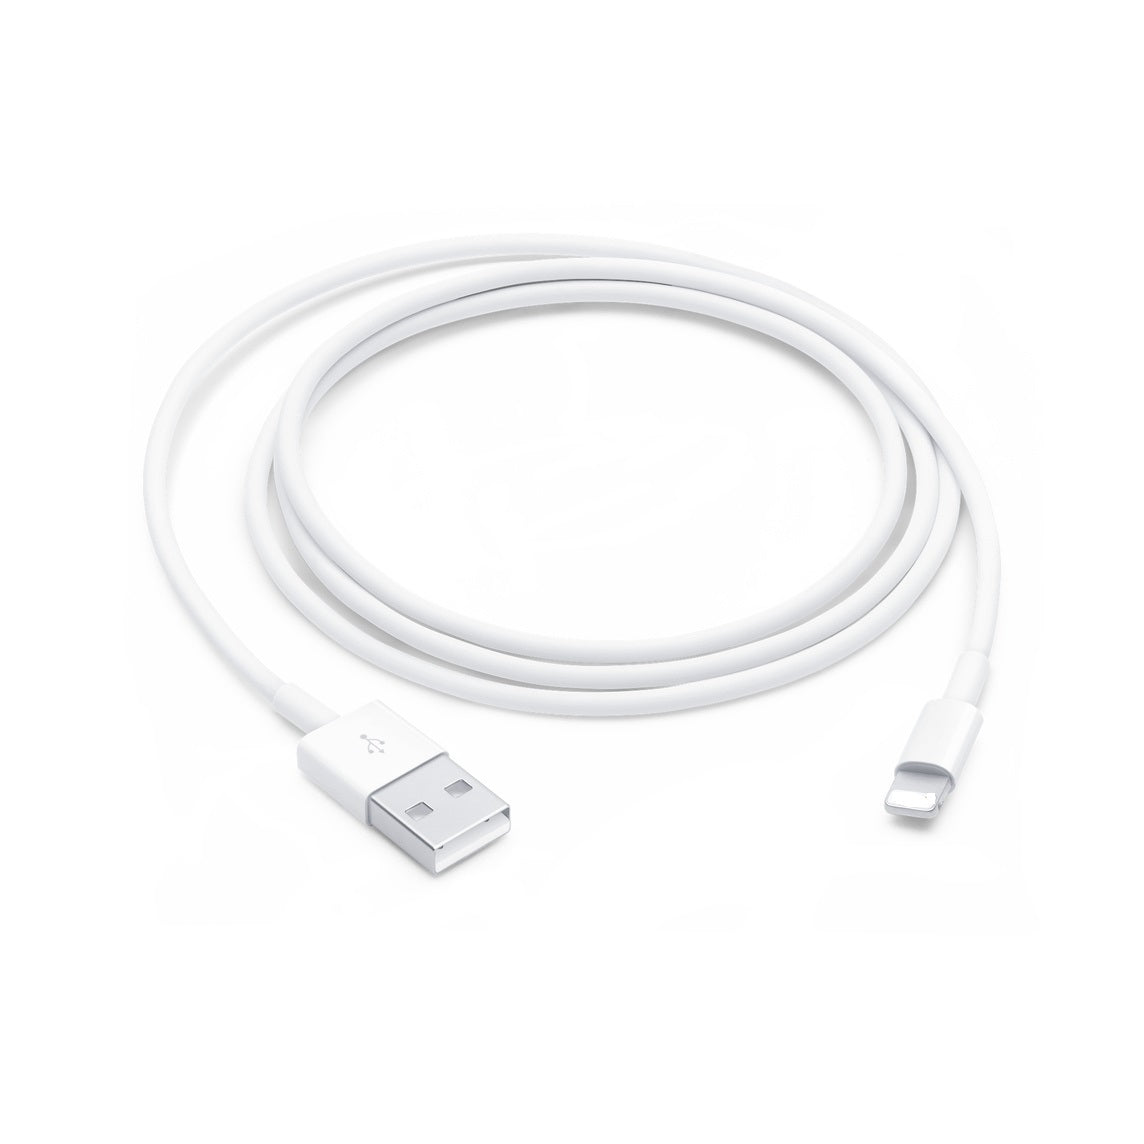 1m iPhone to USB Cable - Premium Quality